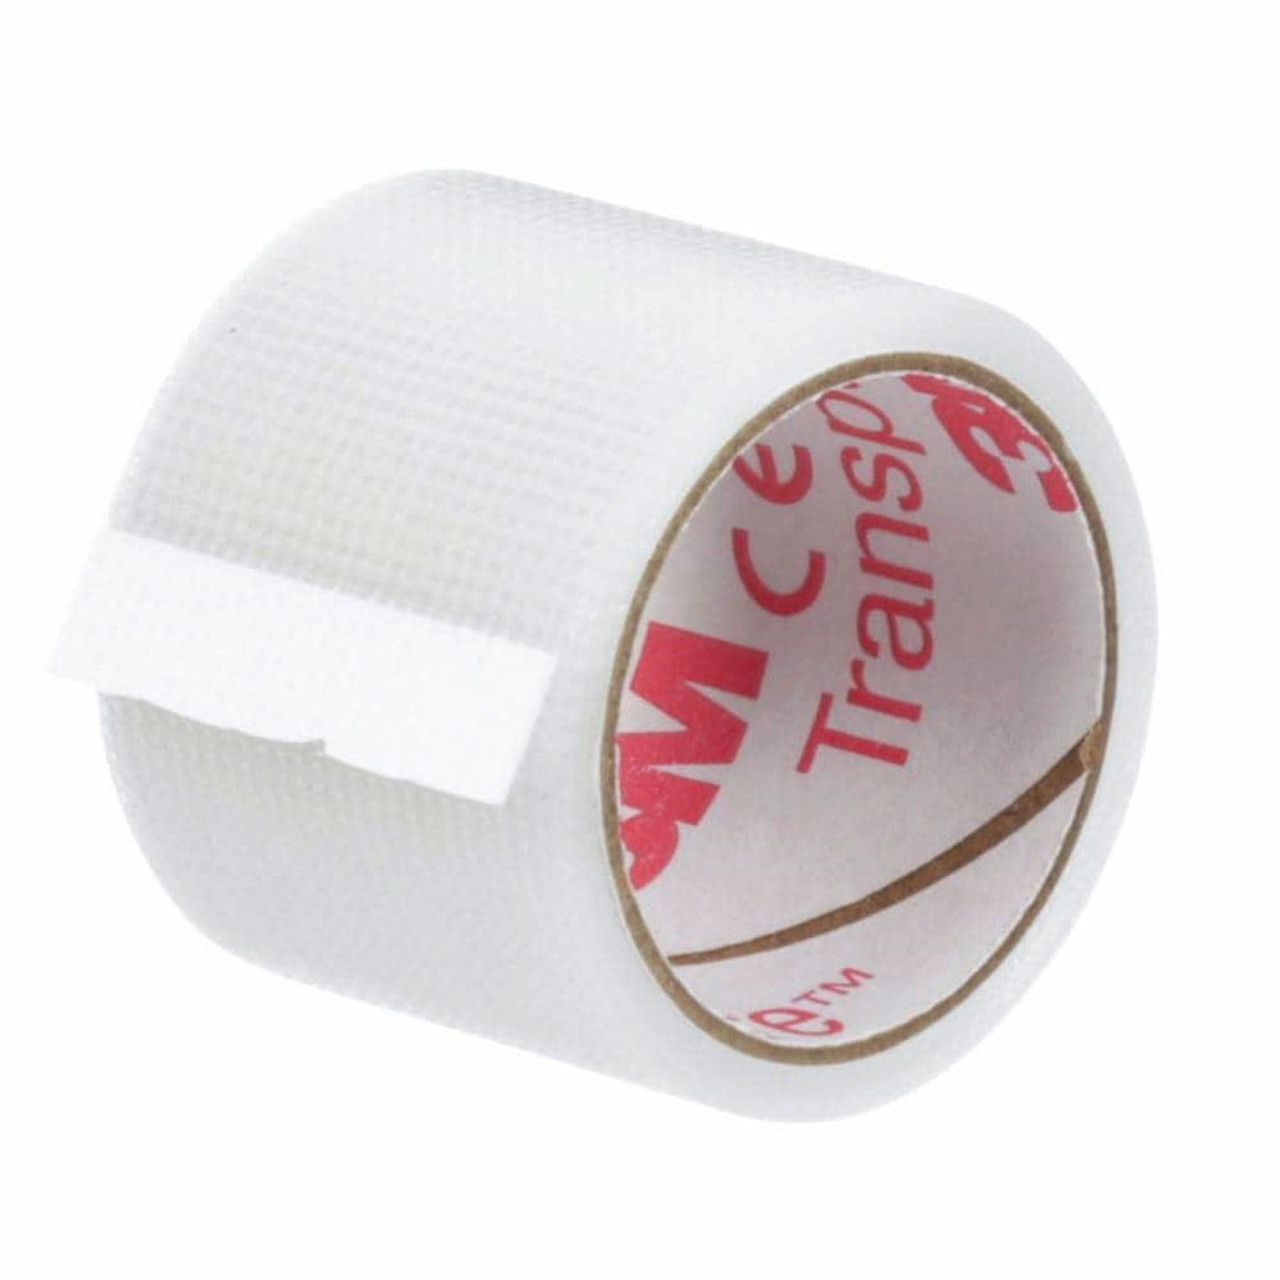 3M 1527S Transpore Clear Surgical Tape 1 X 1.5 yd Pack of 20 Rolls for  wireless mics - Monkey Wrench Productions Store